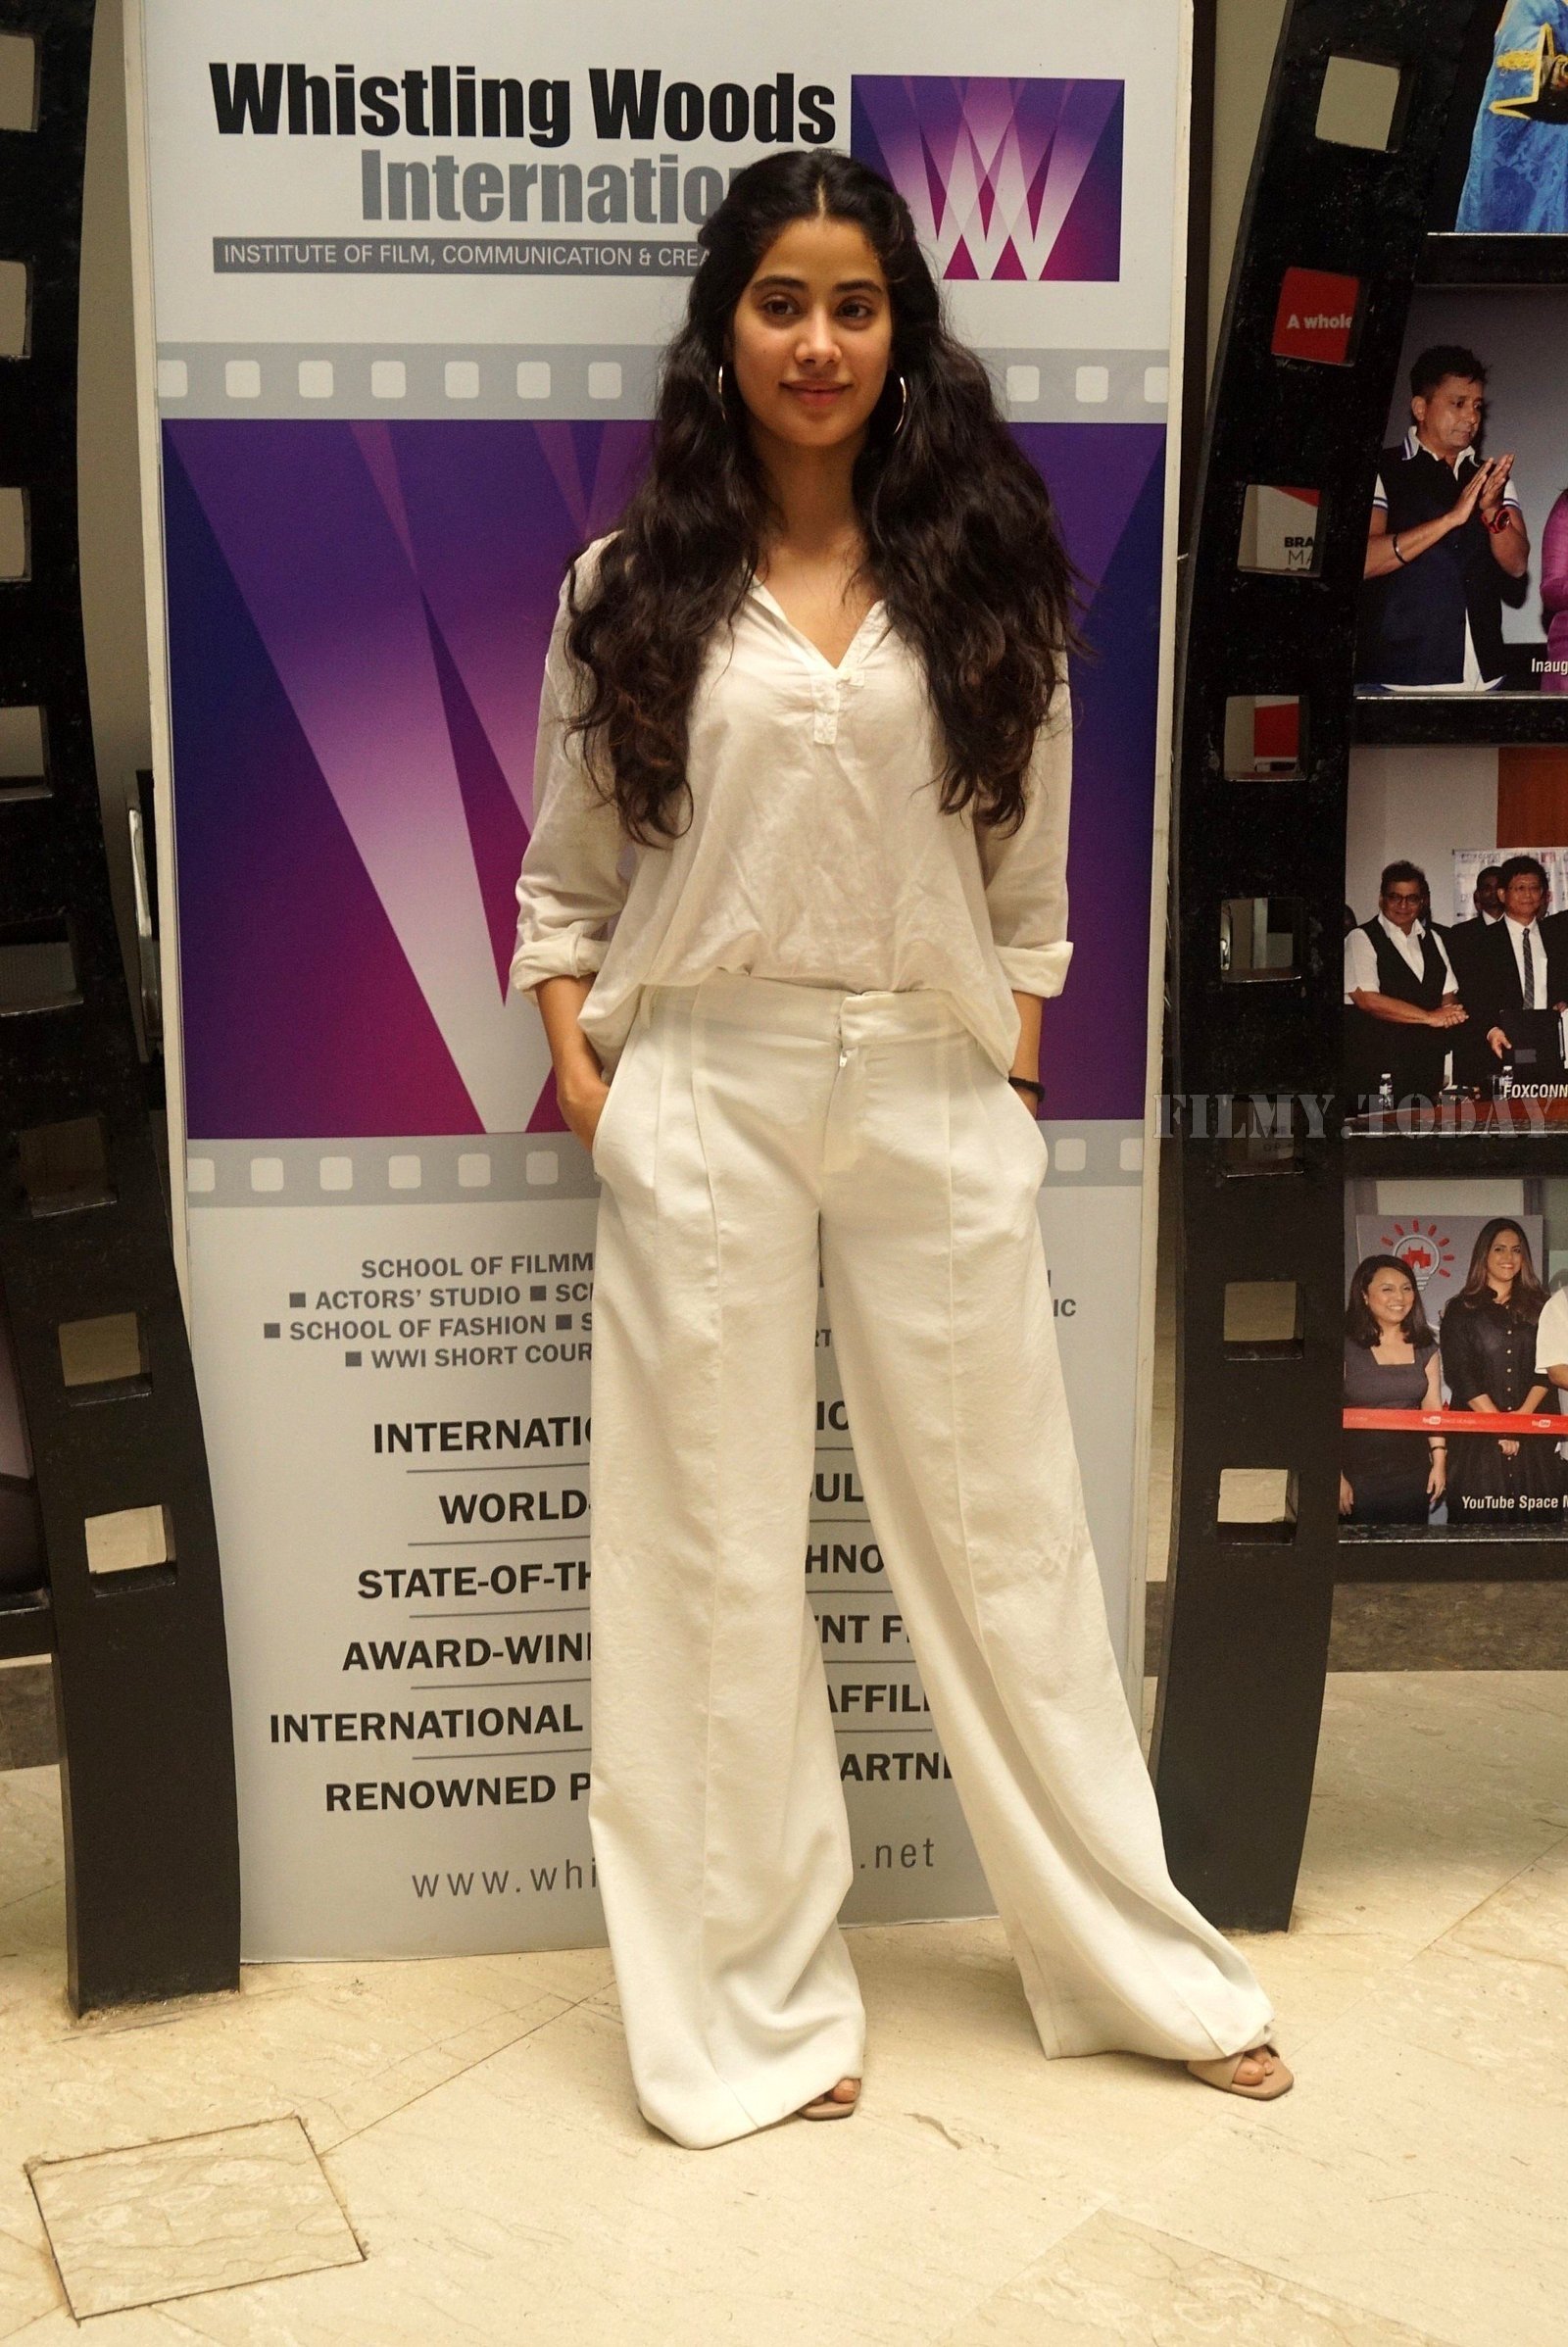 Photos: Janhvi Kapoor at Master Class at Whistling Woods | Picture 1592627